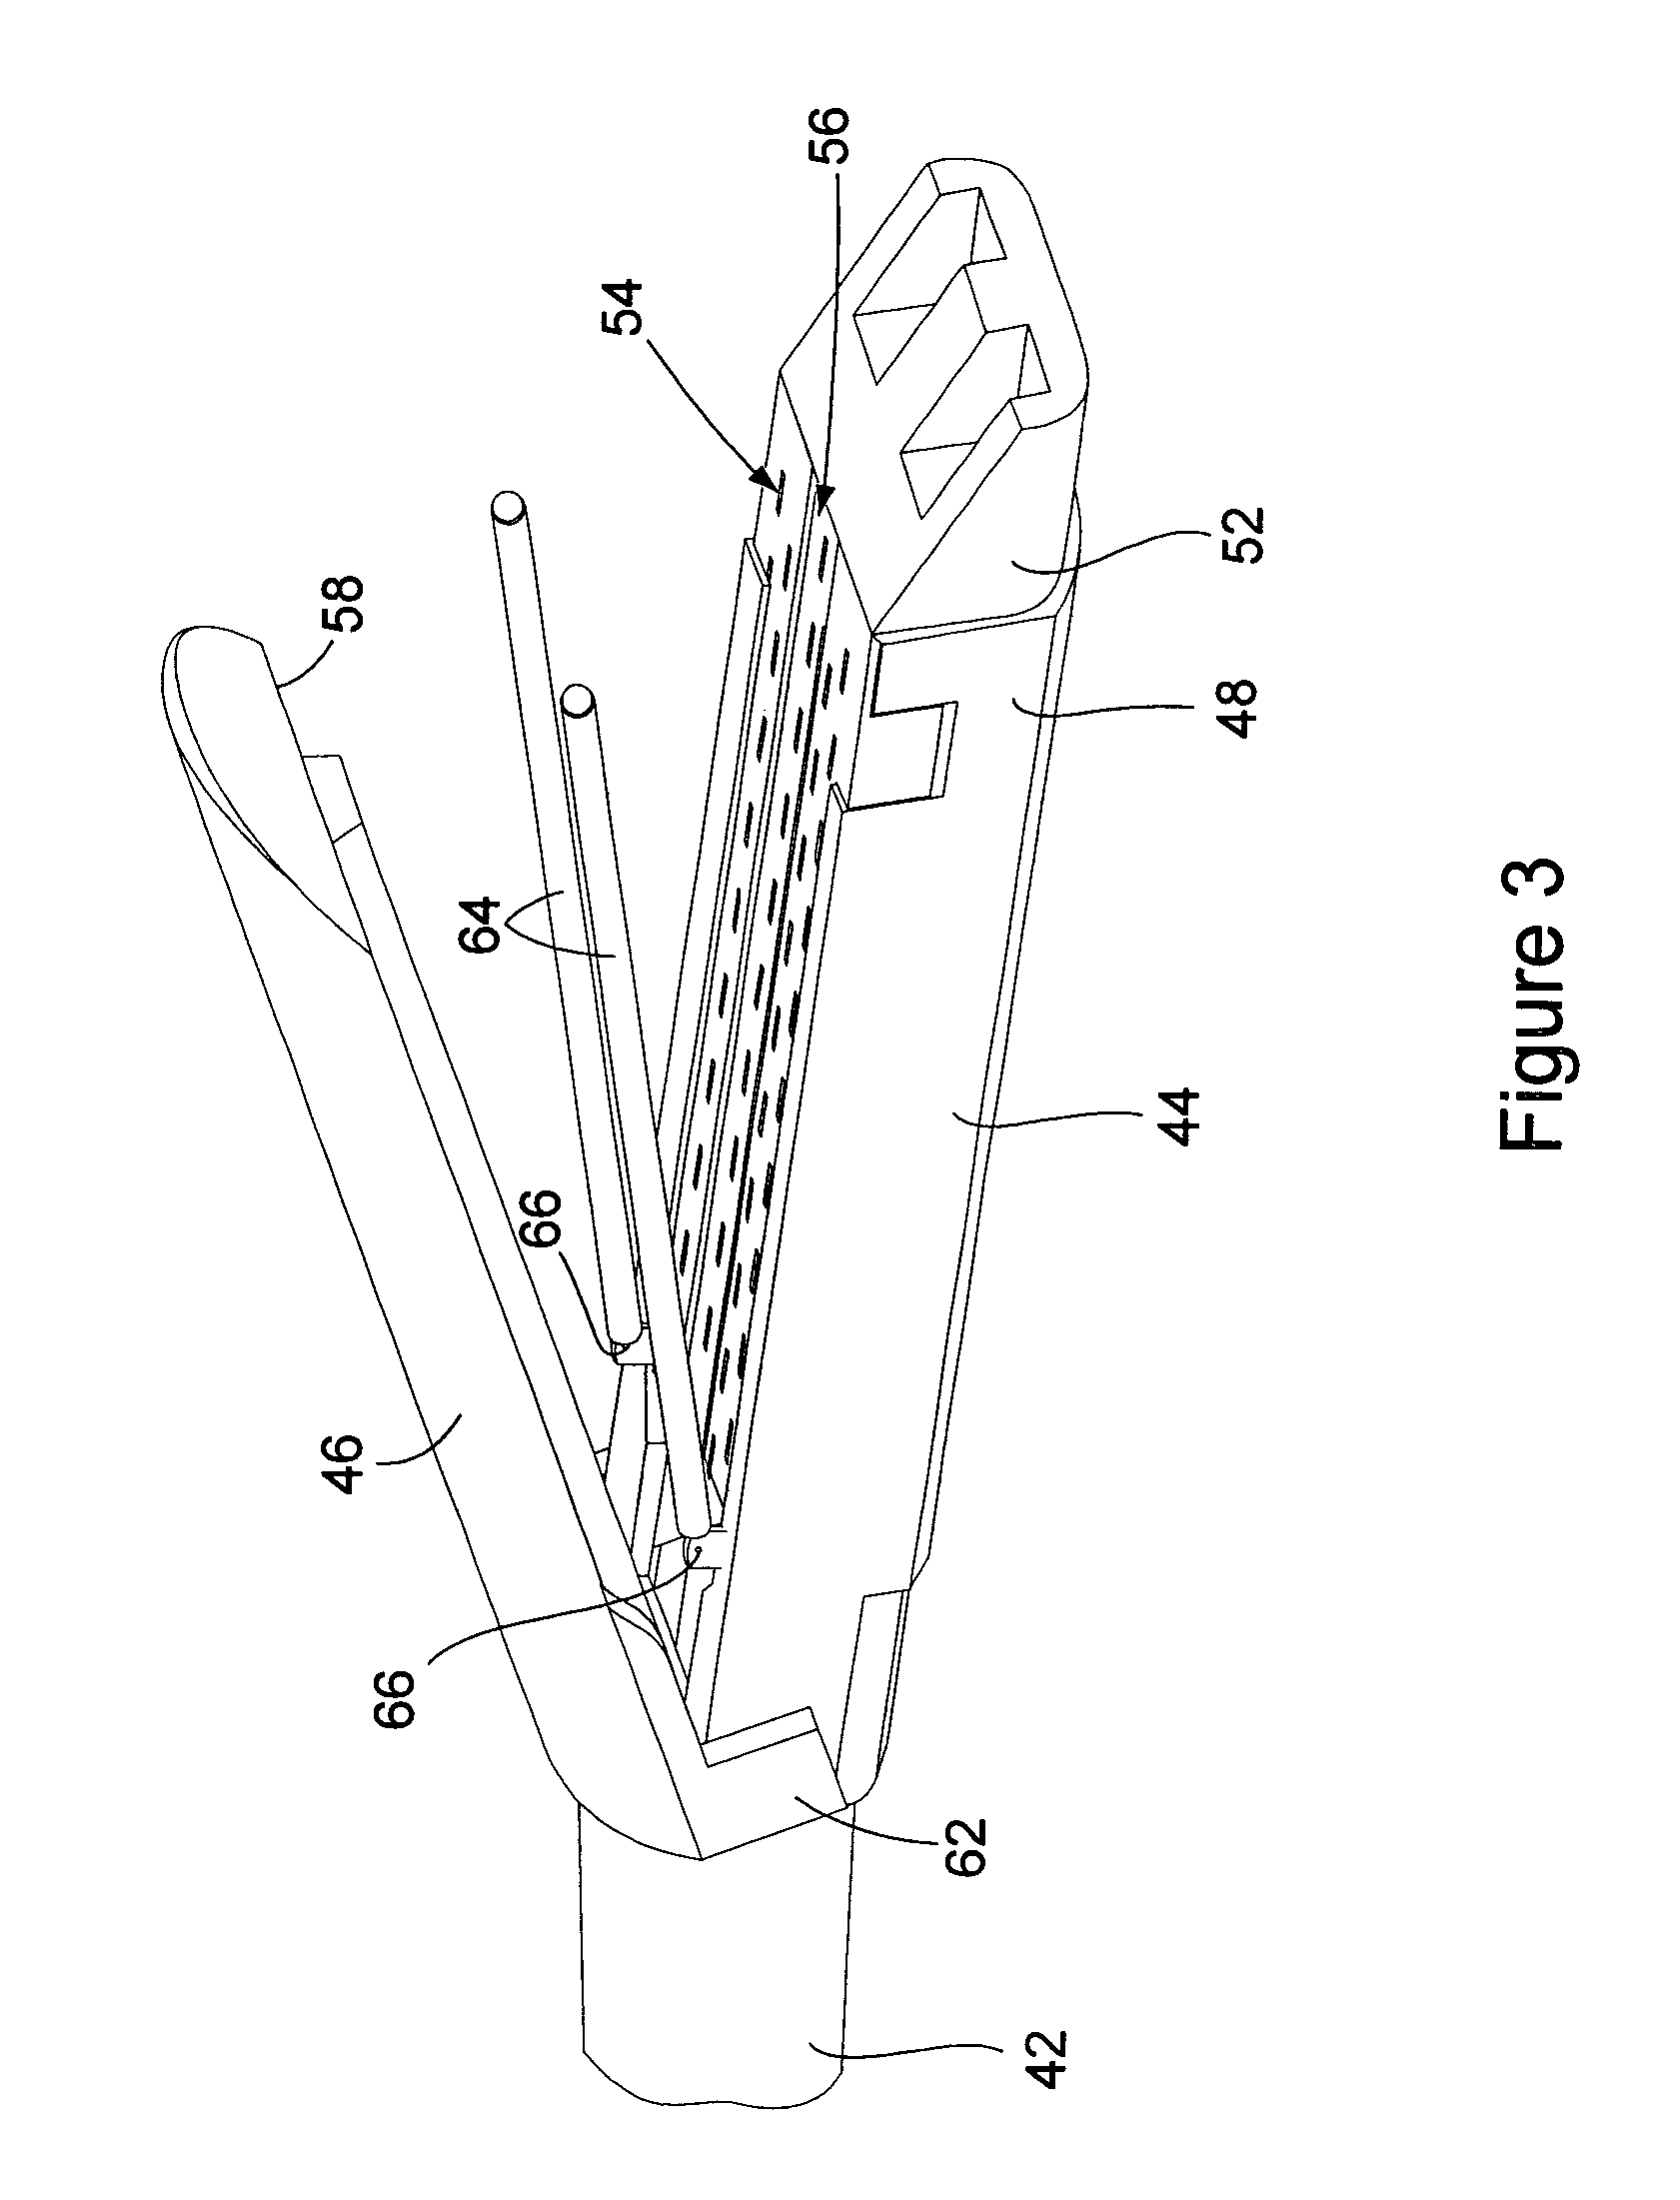 Surgical fastener apparatus and reinforcing material